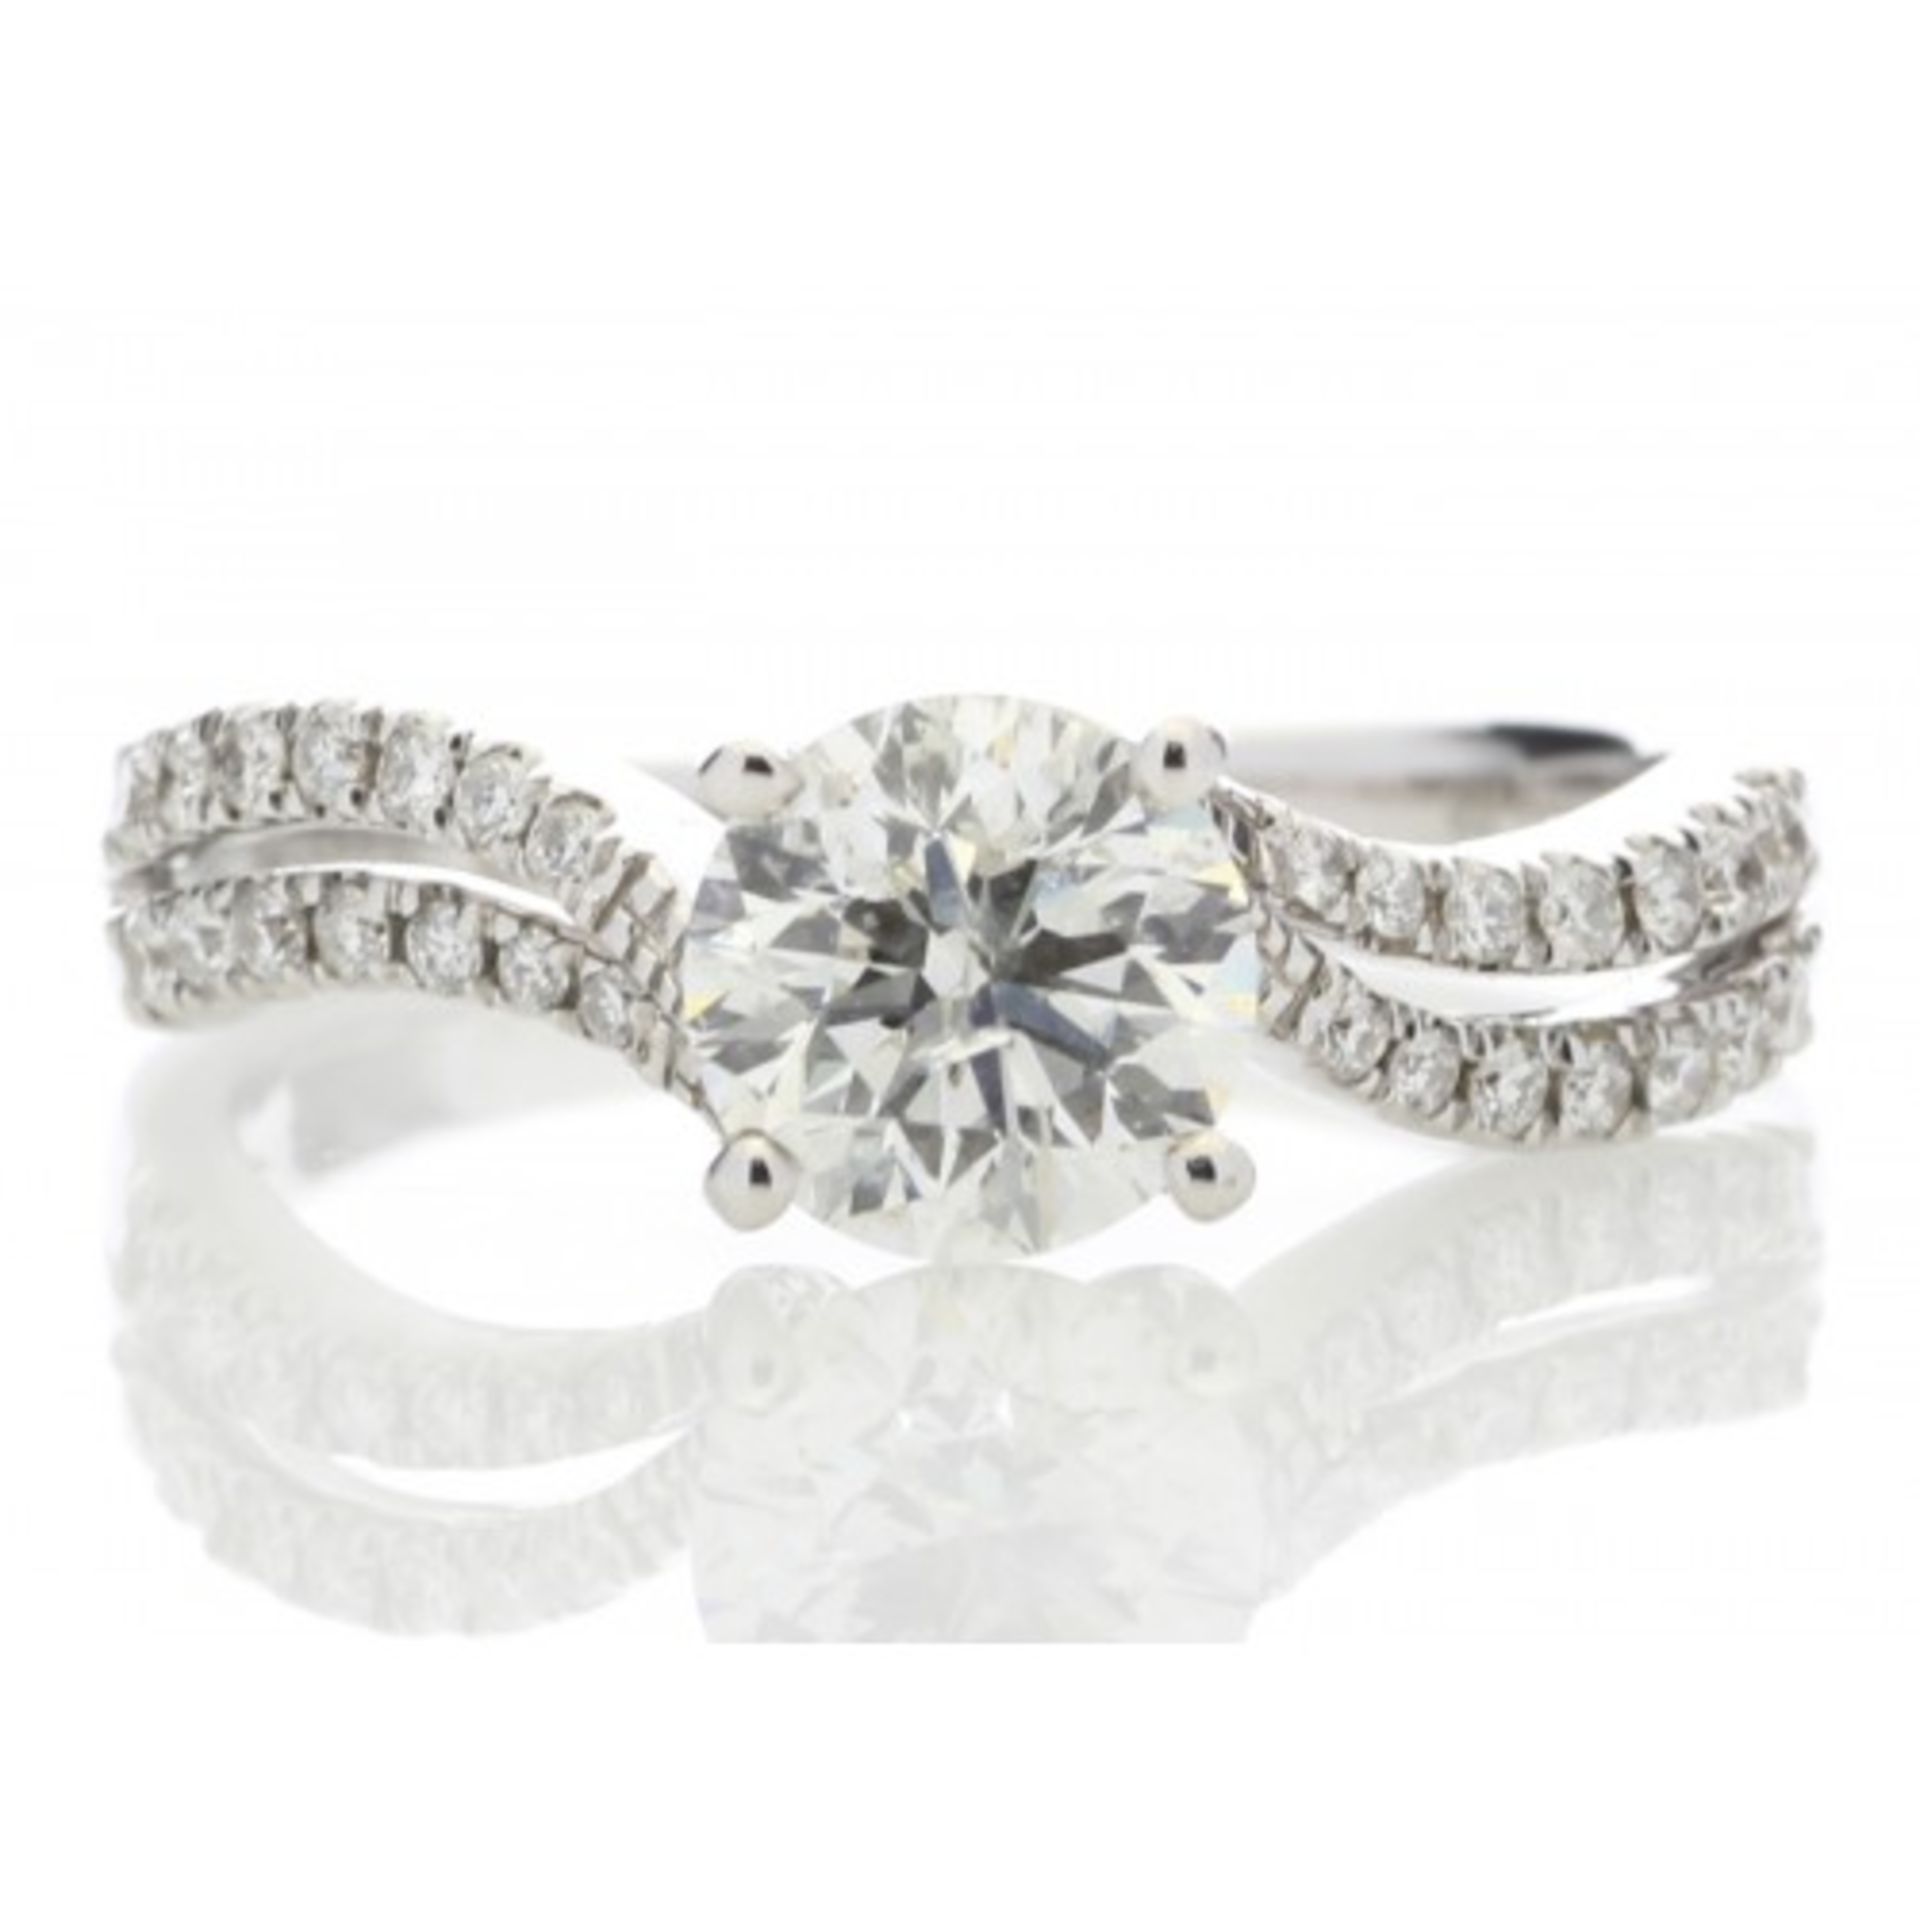 1.31ct diamond set solitaire ring set in 18ct gold with split shoulders. Centre stone 1.09ct, E